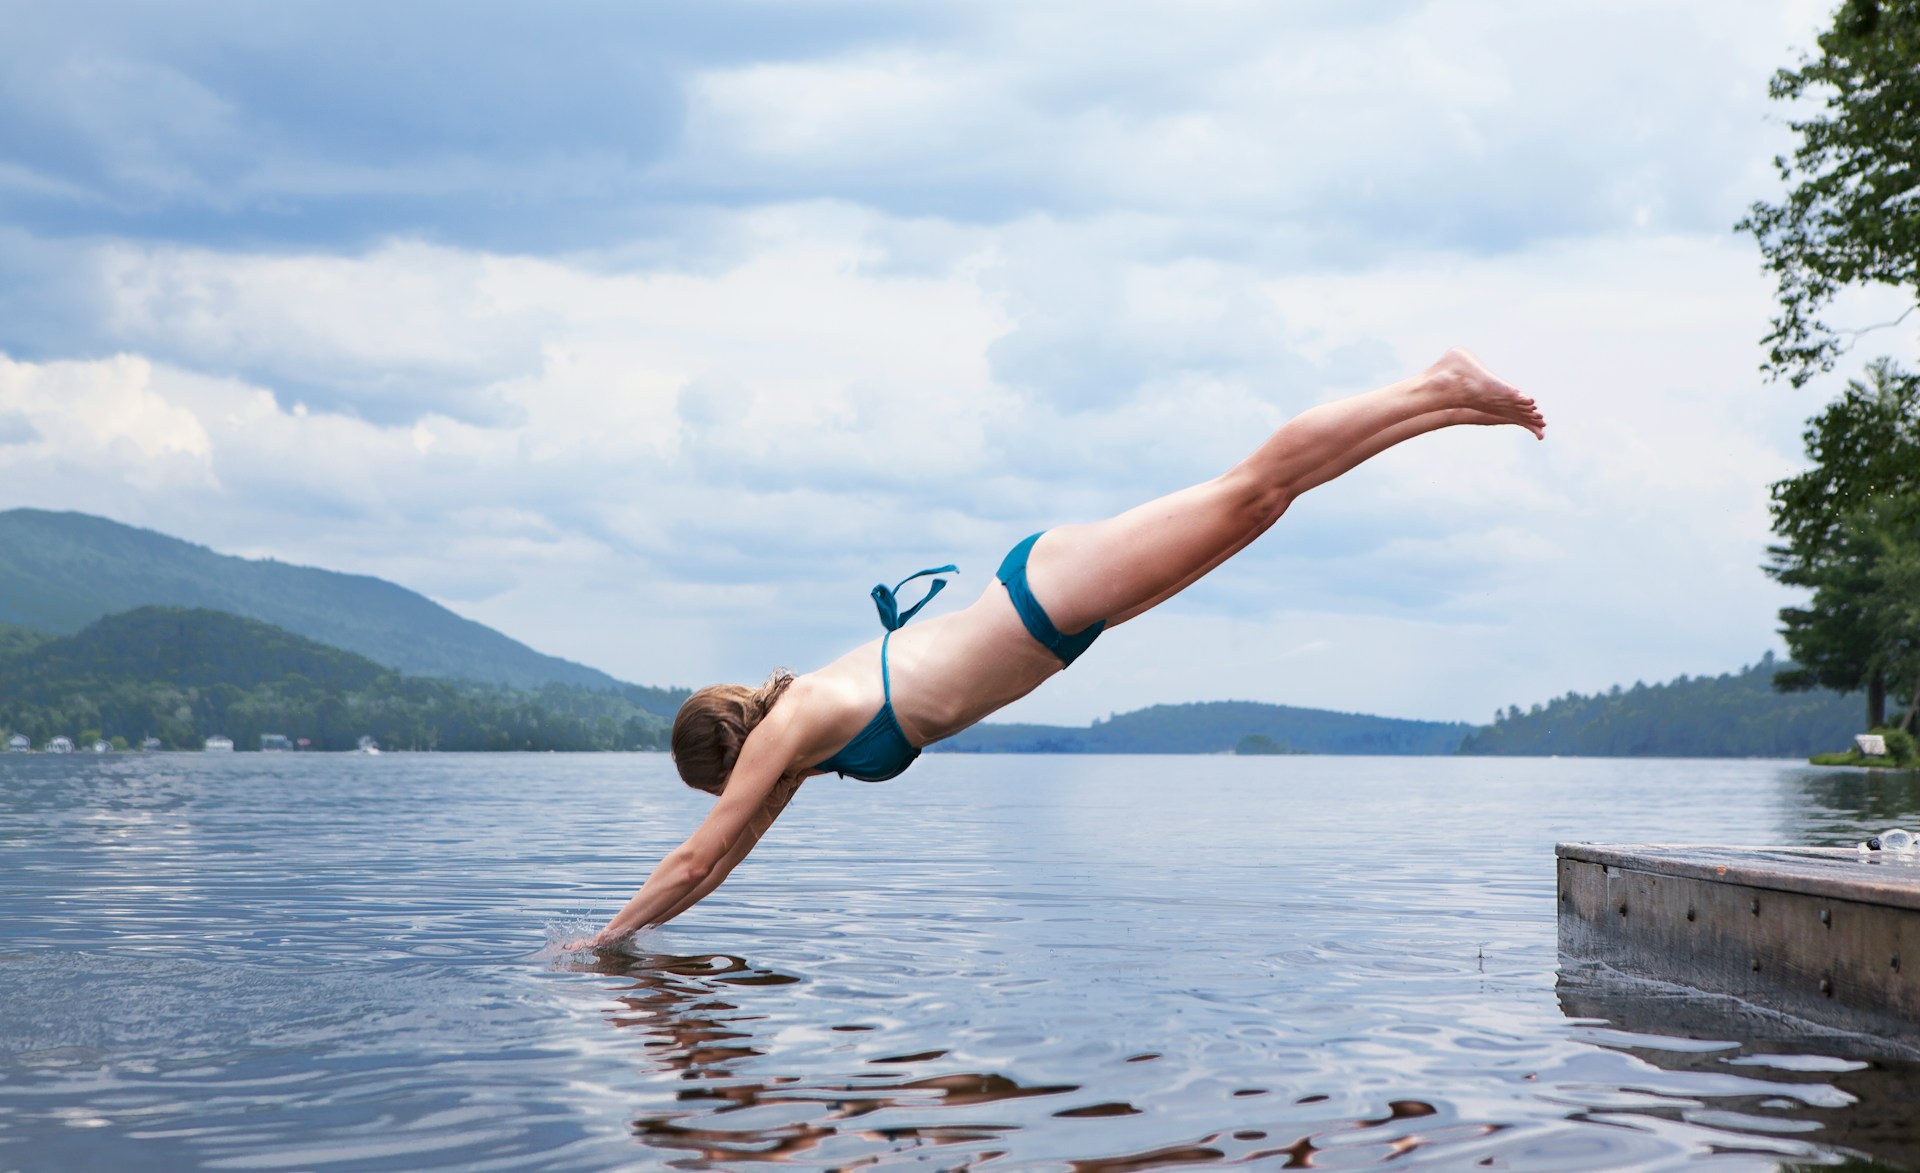 best free things to do in Central MA – swimming in one of its lakes